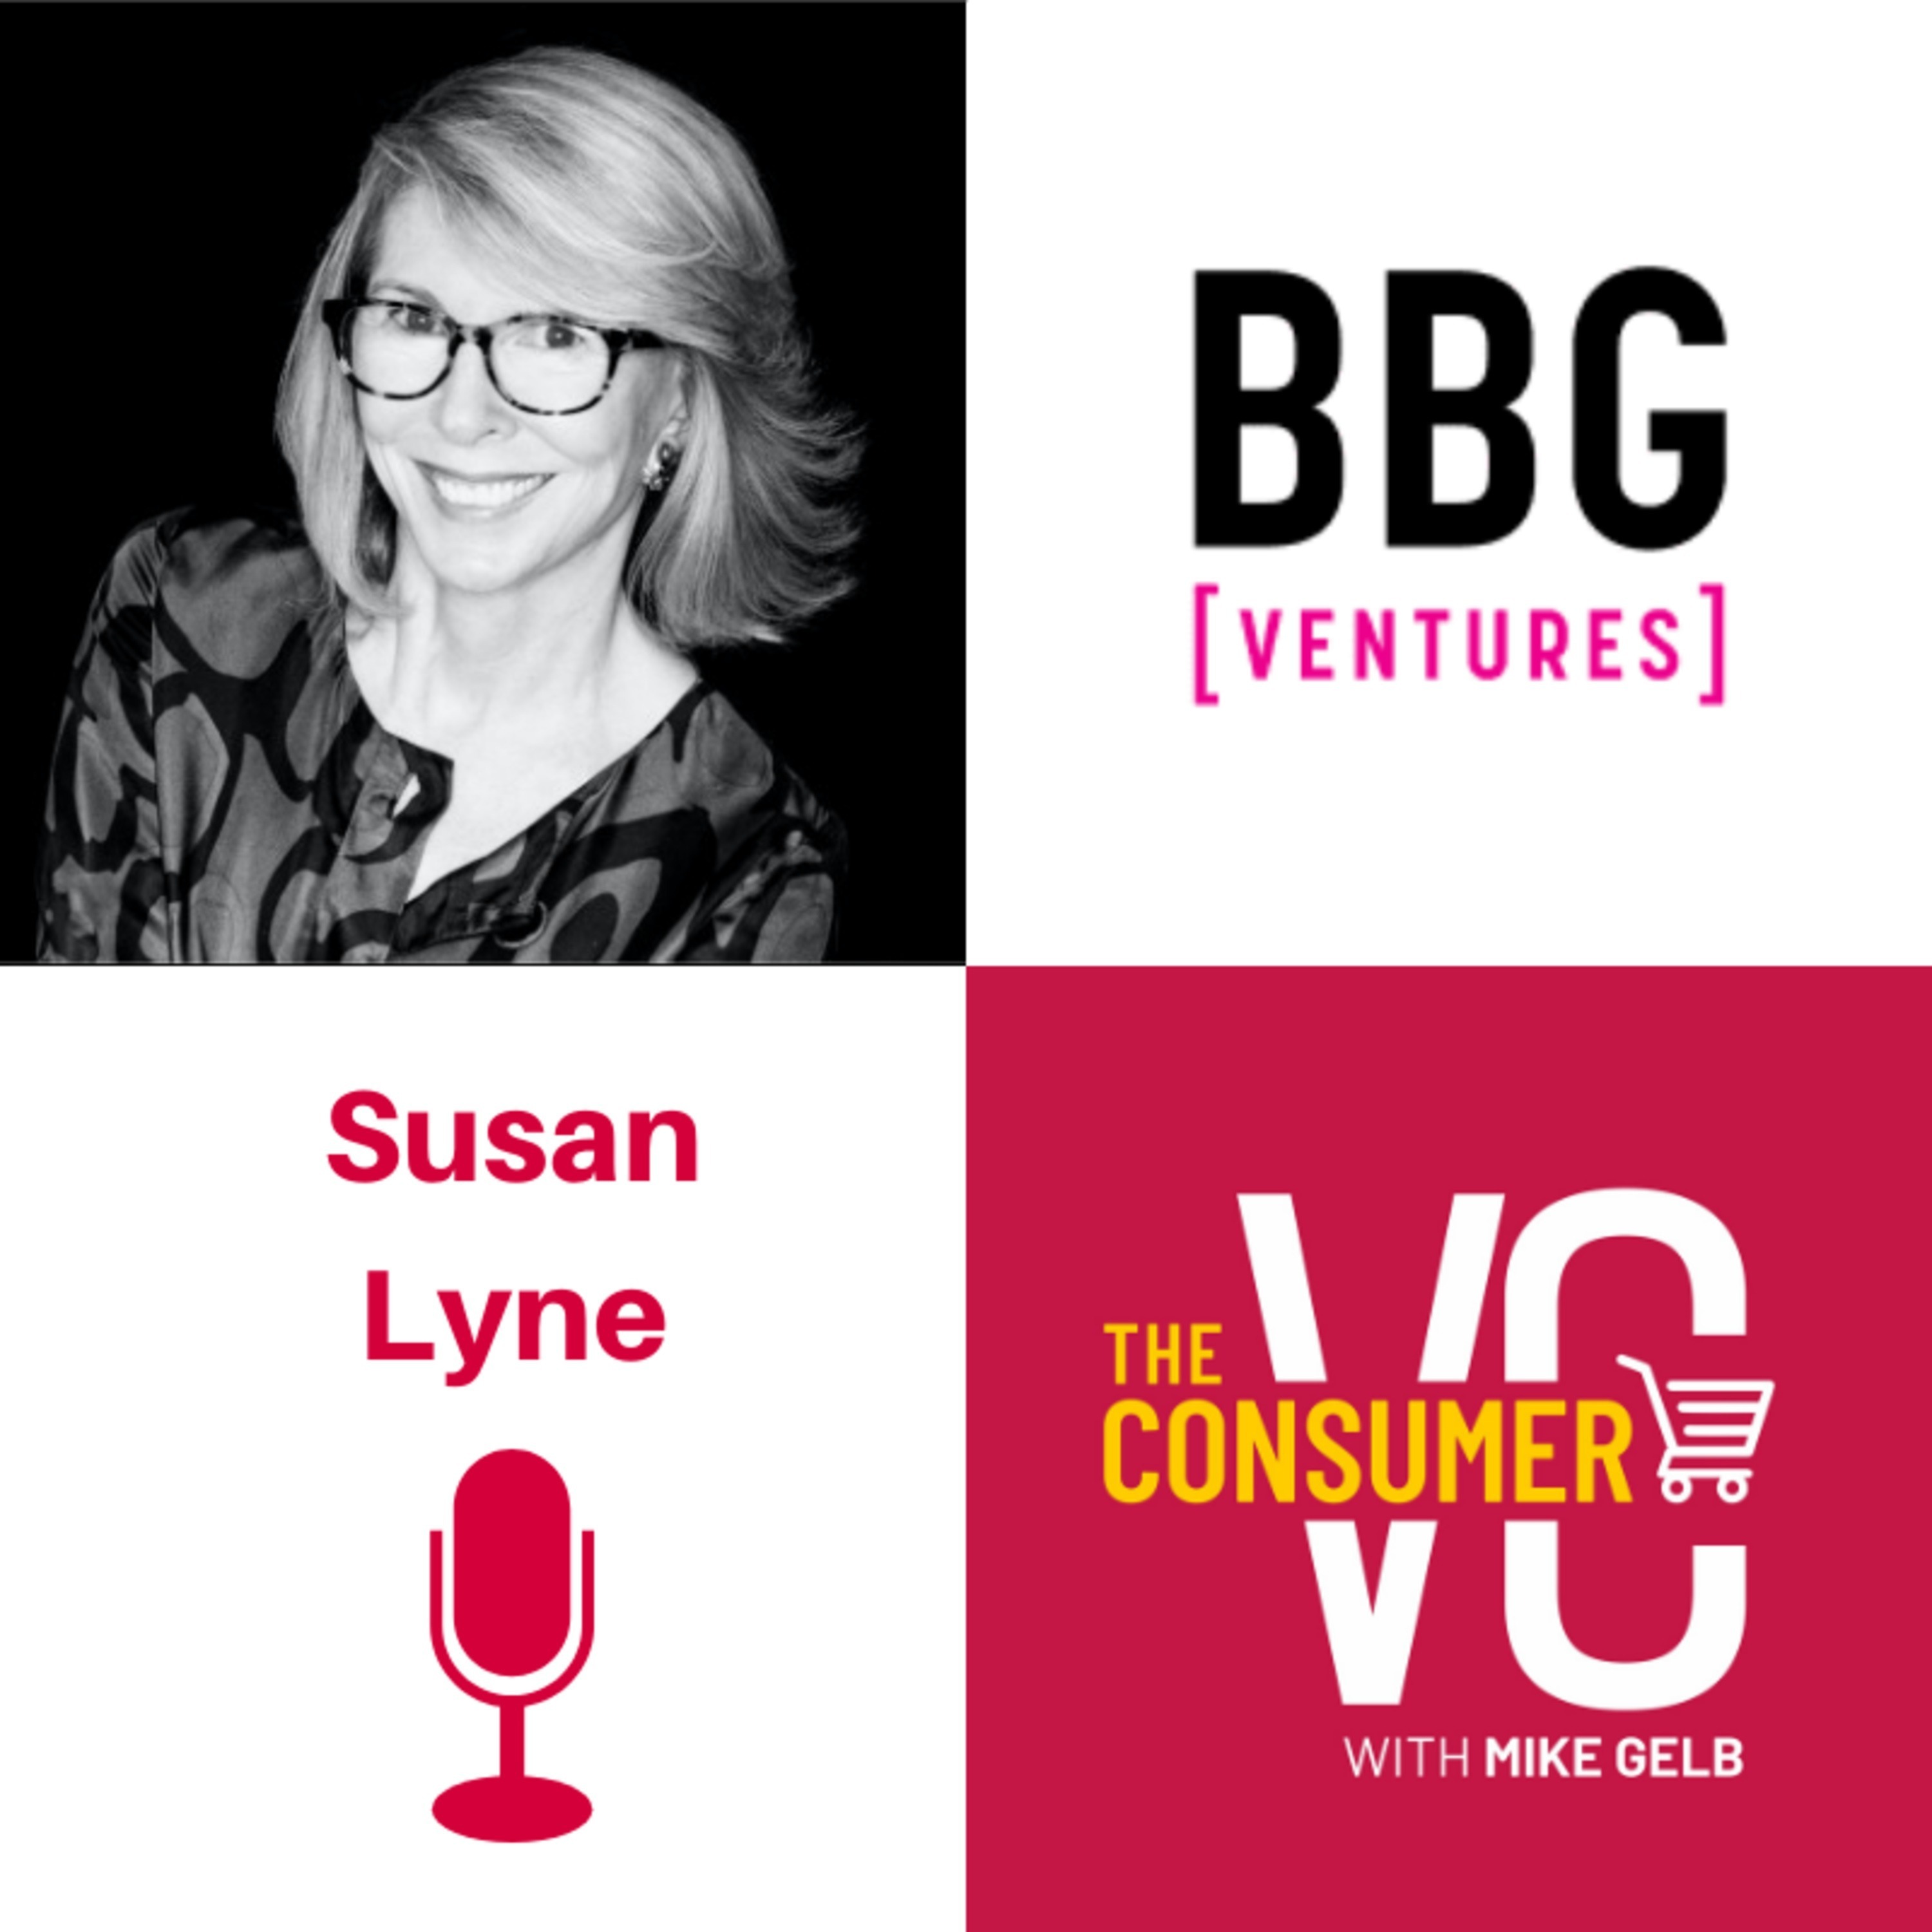 Susan Lyne (BBG Ventures) - Why Investing in Women Founders is Still an Untapped Market